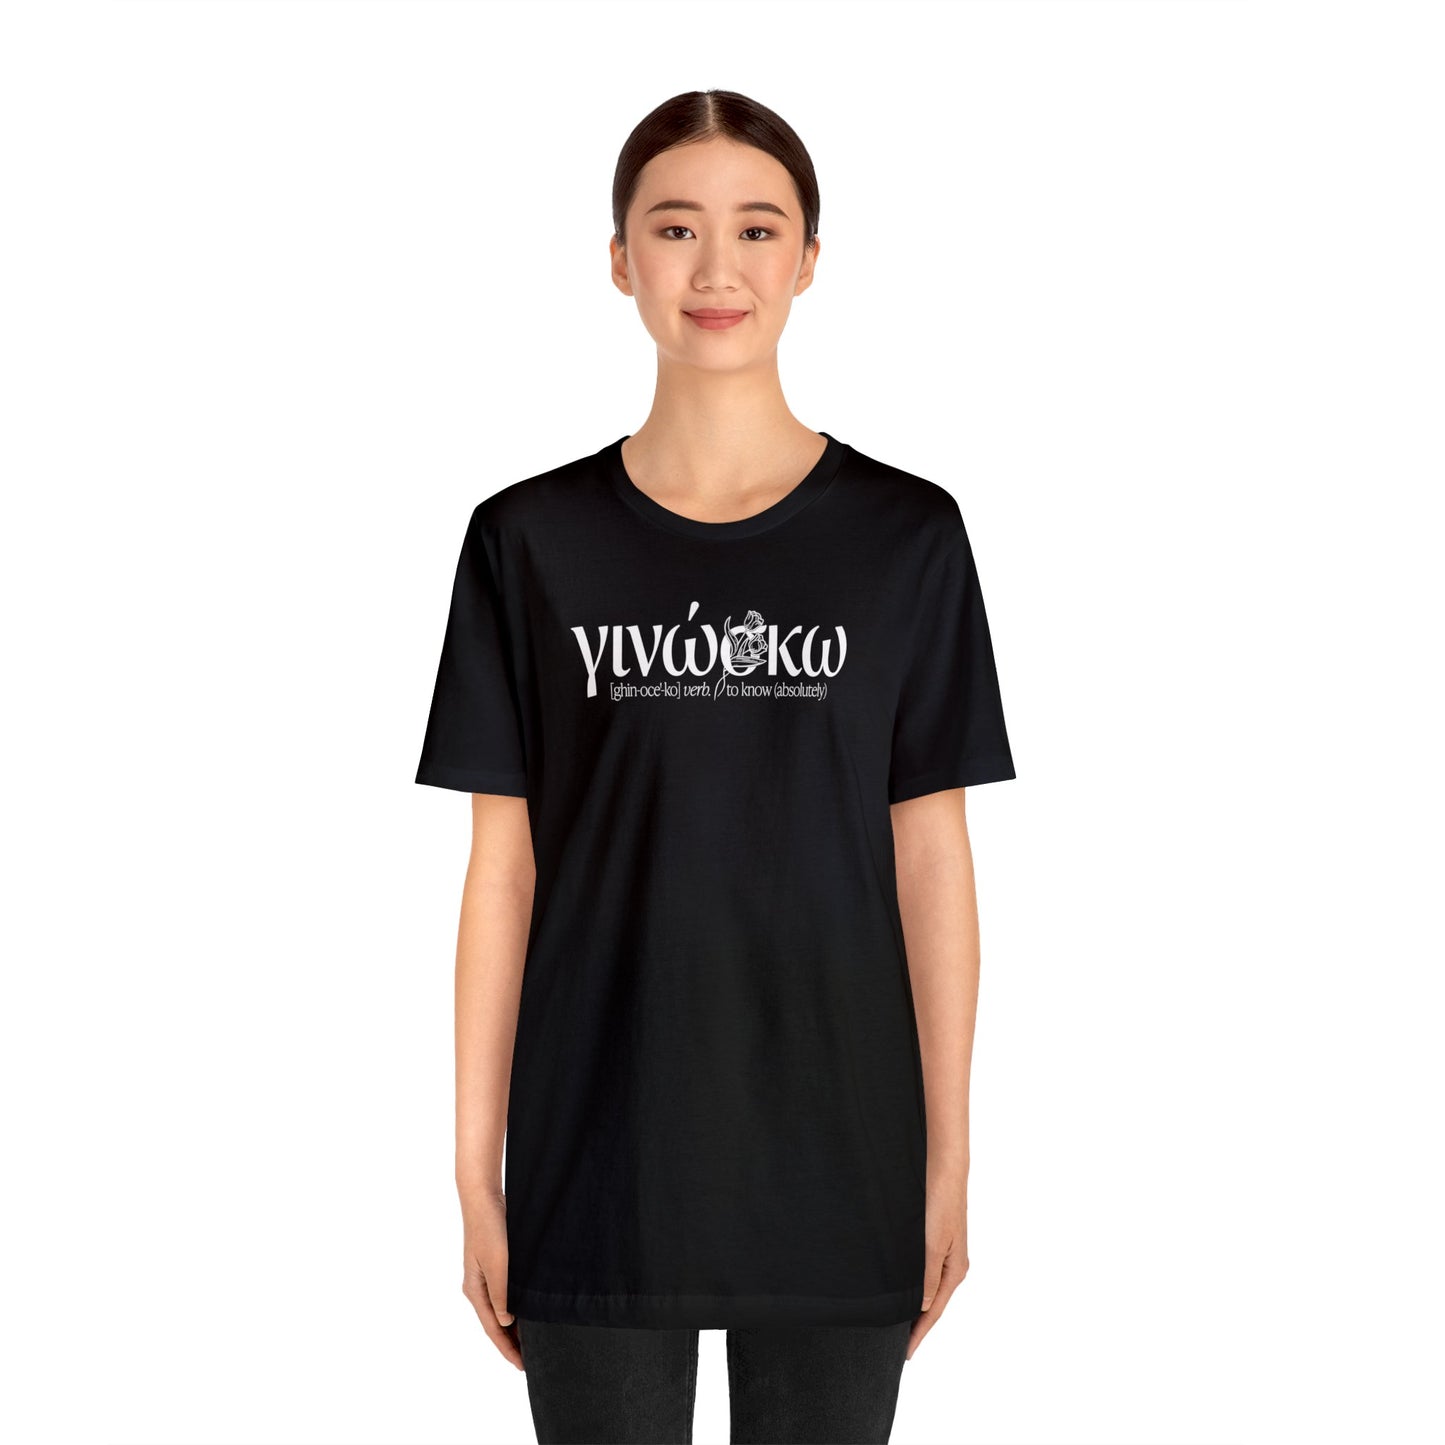 Women's Conference Tee